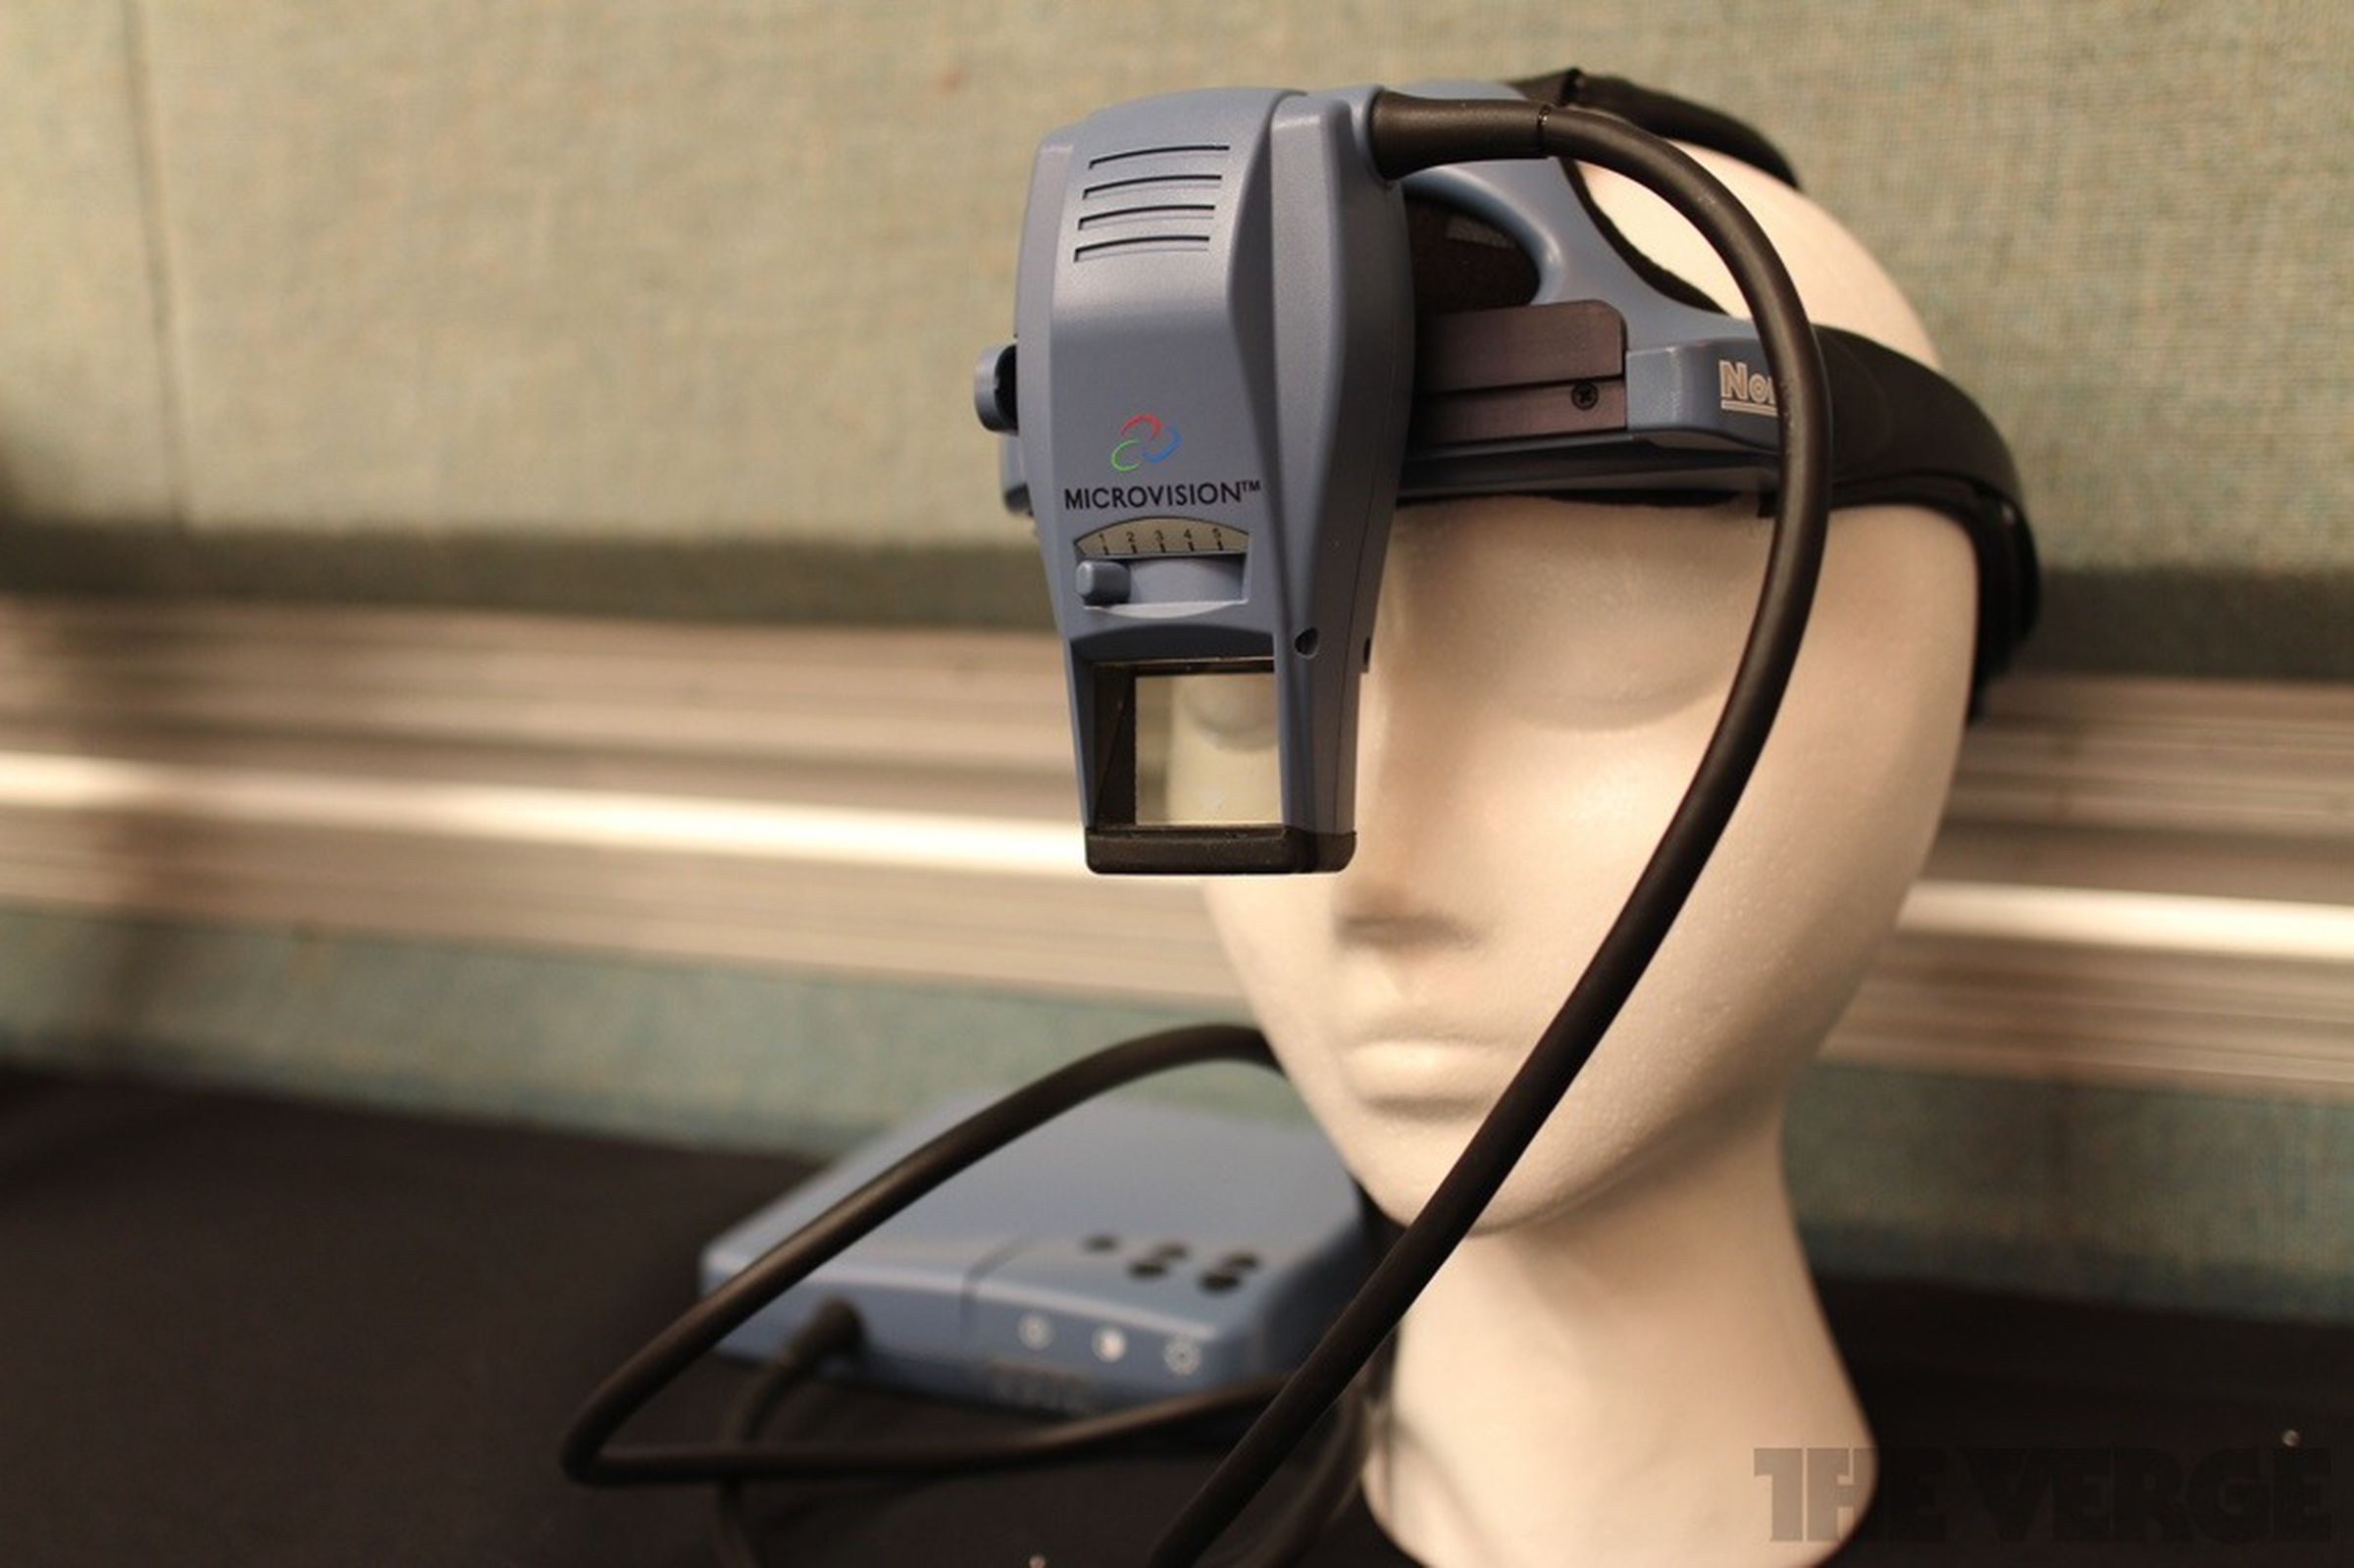 35 years of wearable computing history at Augmented World Expo 2013